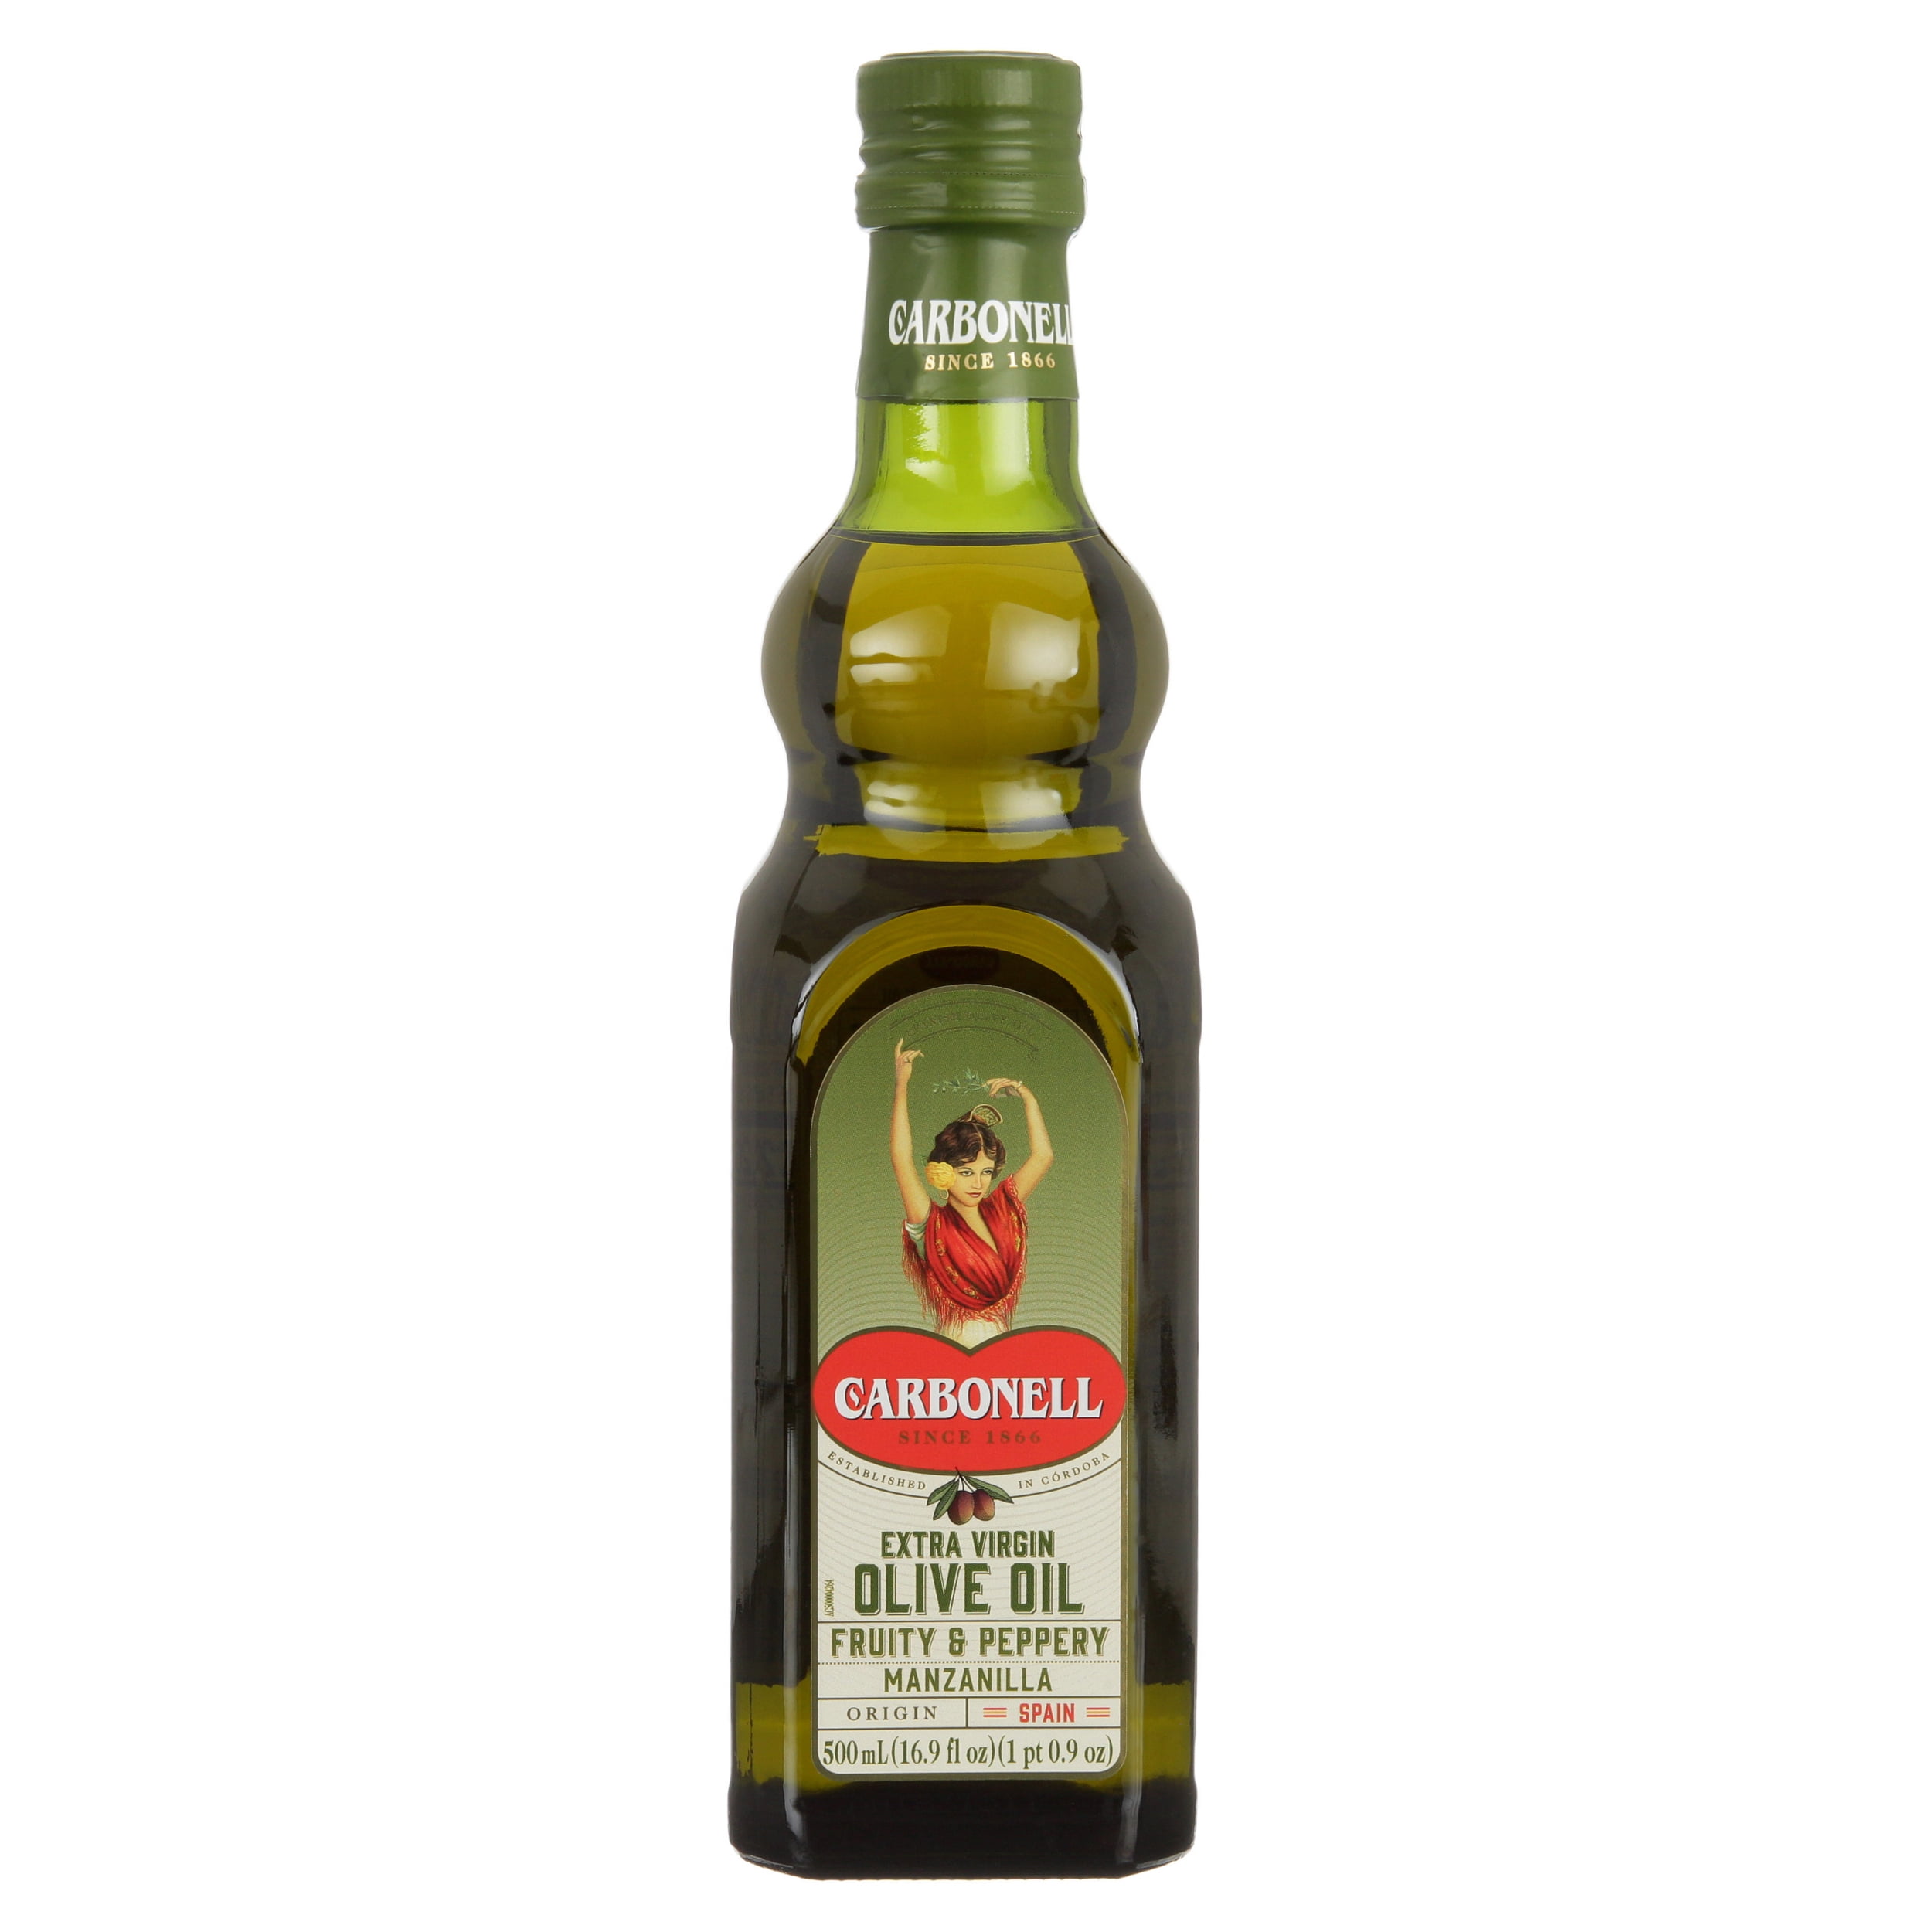 Carbonell Olive Oil. Оливковое масло Карбонелл. Бальзамический уксус Carbonell. Оливковое масло Carbonell для каких блюд.